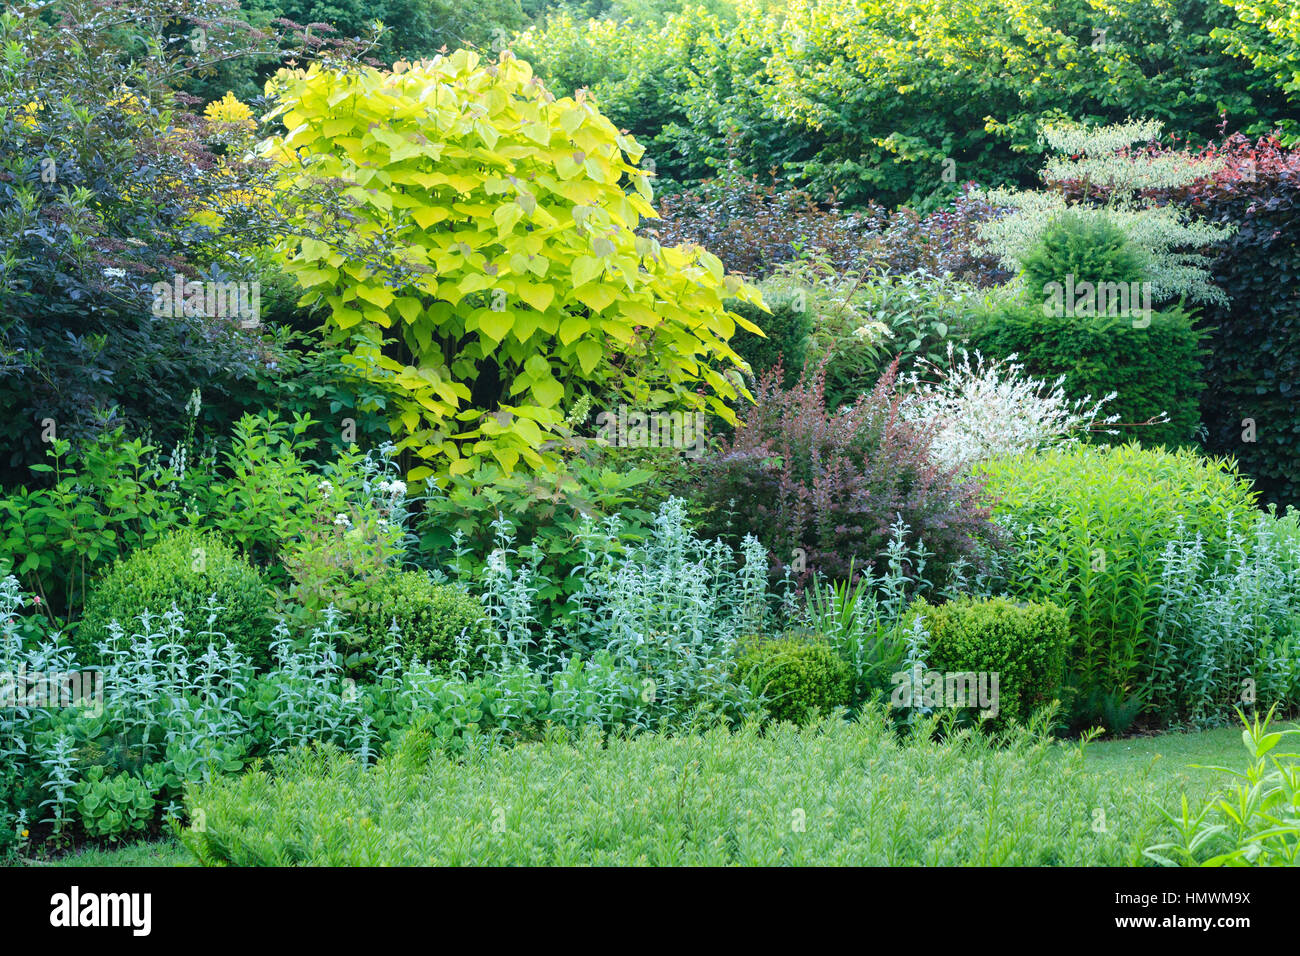 Contrasting bed of shrubs in the Gardens of Pays d'Auge, Normandy, France. Black elder with, Catalpa bignonioides ' Aurea ', Berberis thunbergii ' ... Stock Photo